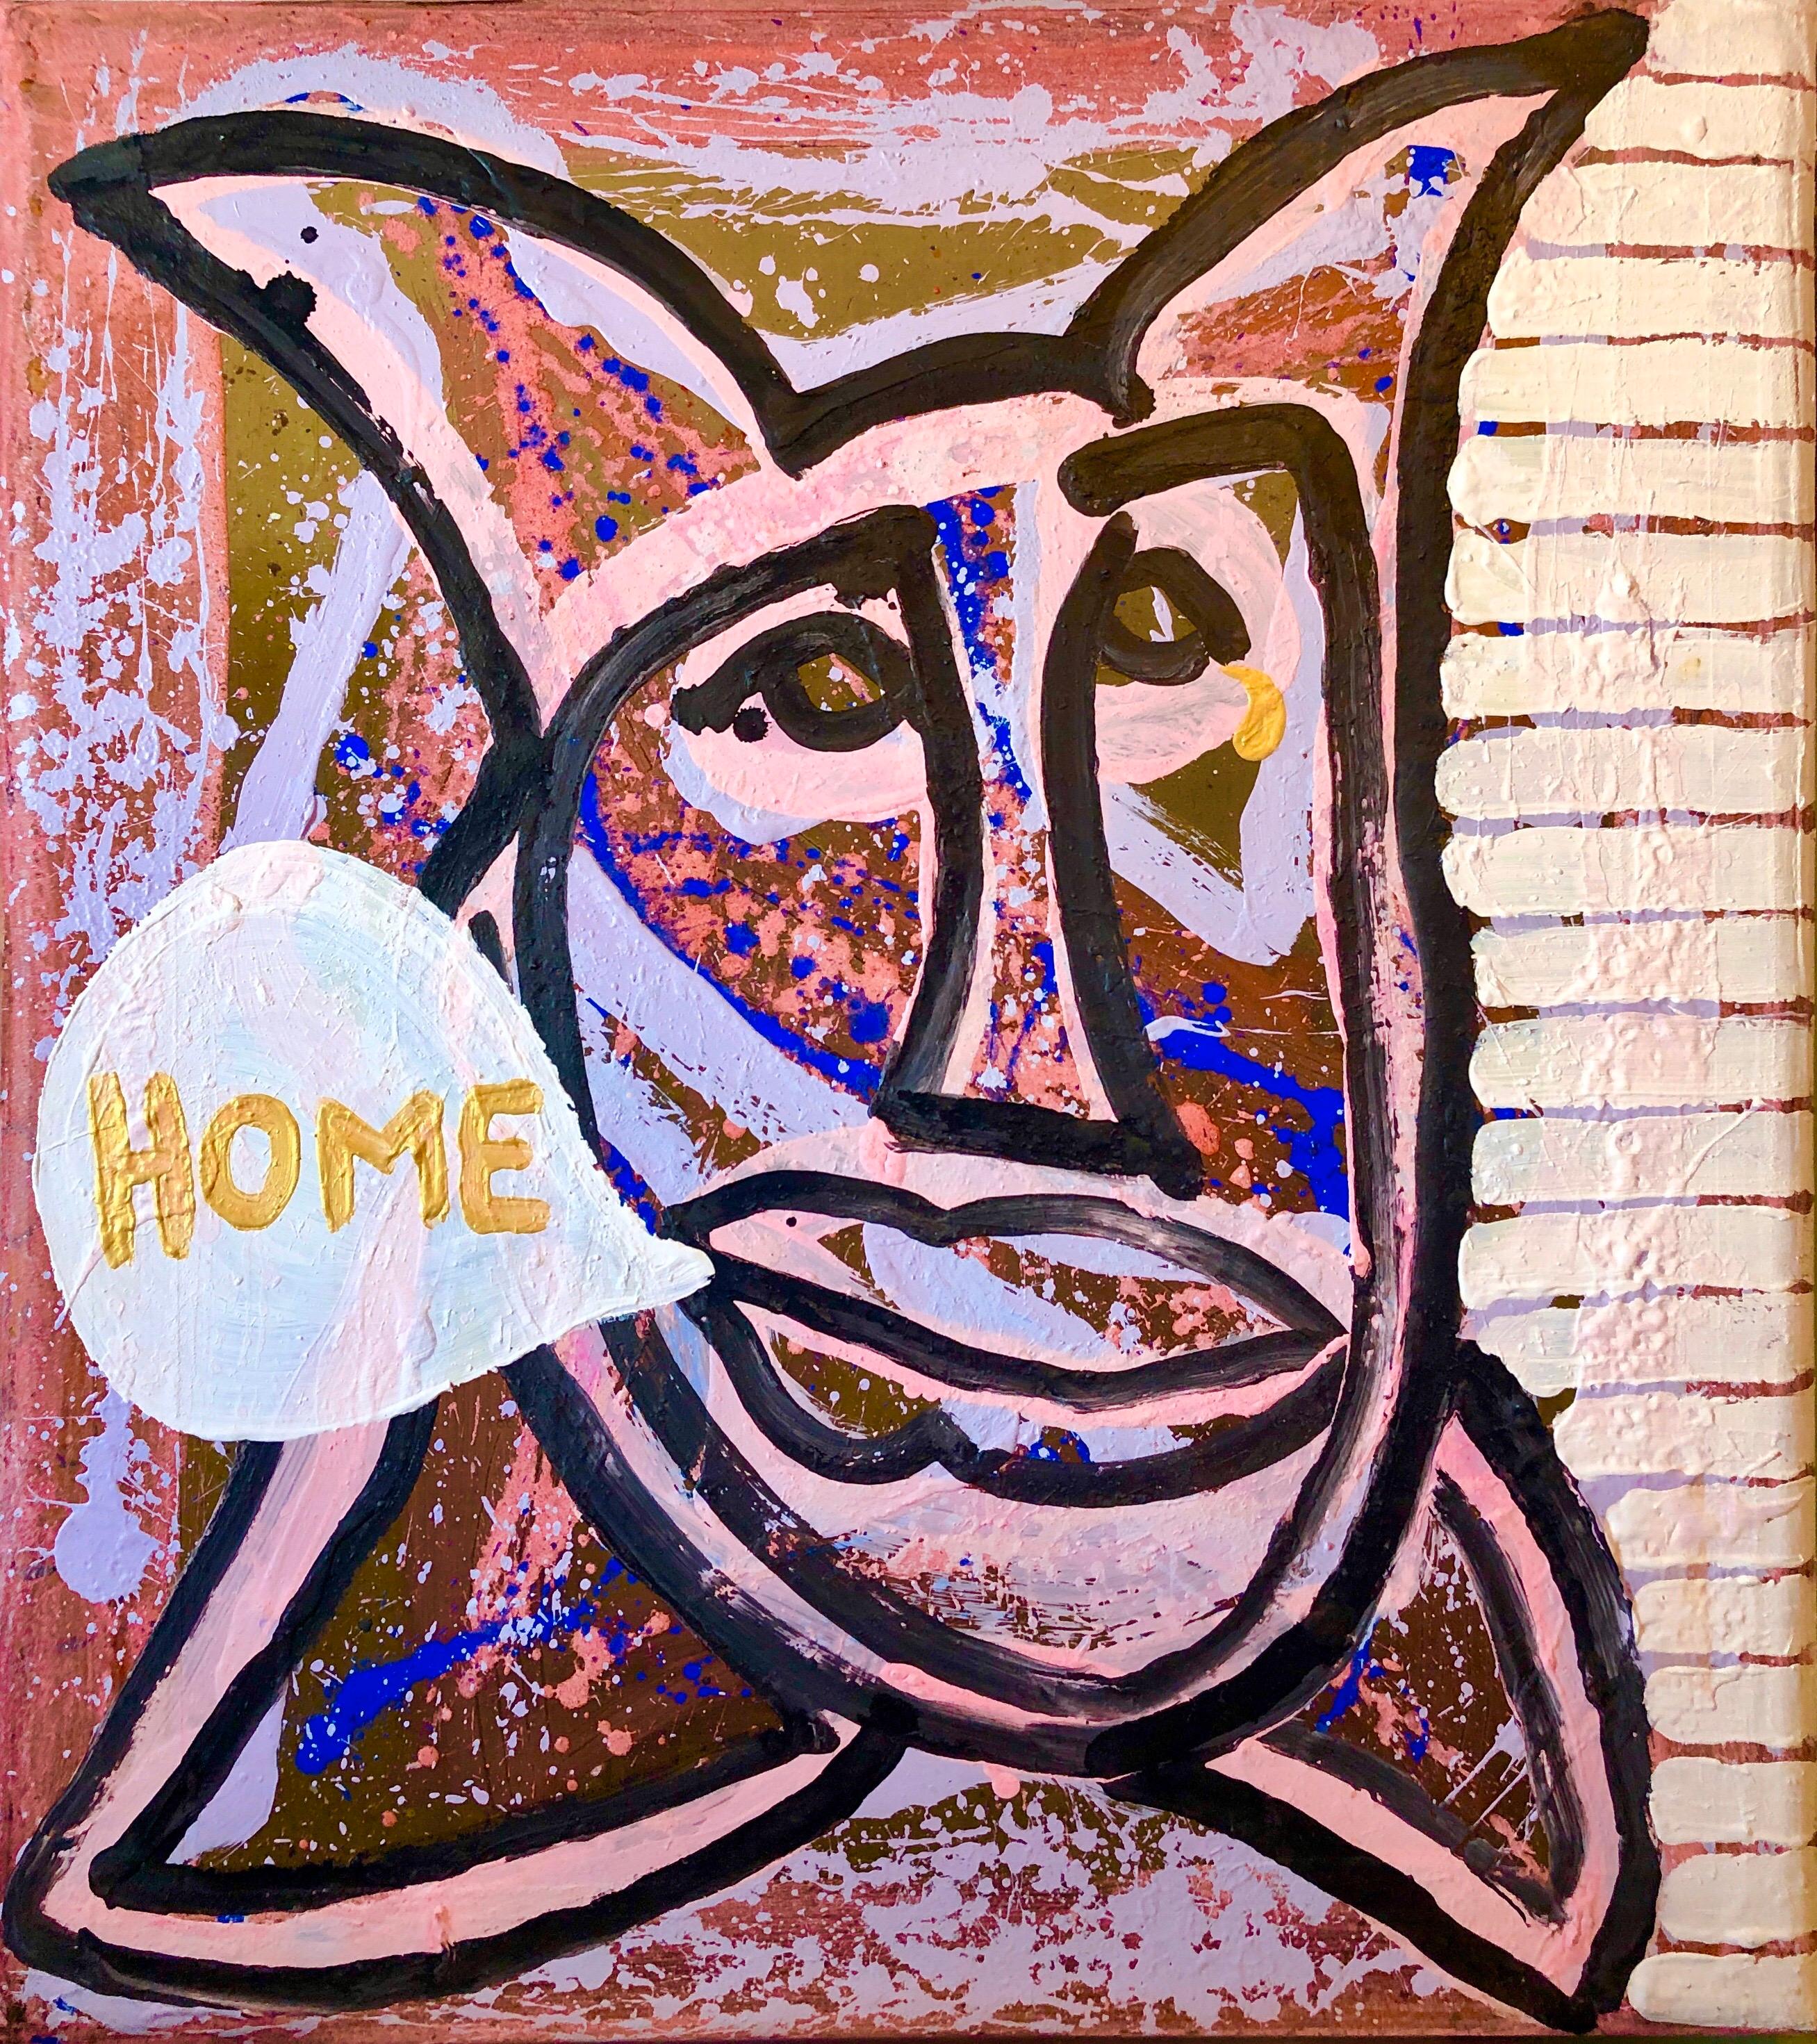 Conceptual Pop Art Color Mixed Media Painting "Home" Brooke Alexander Gallery - Mixed Media Art by Robin Winters